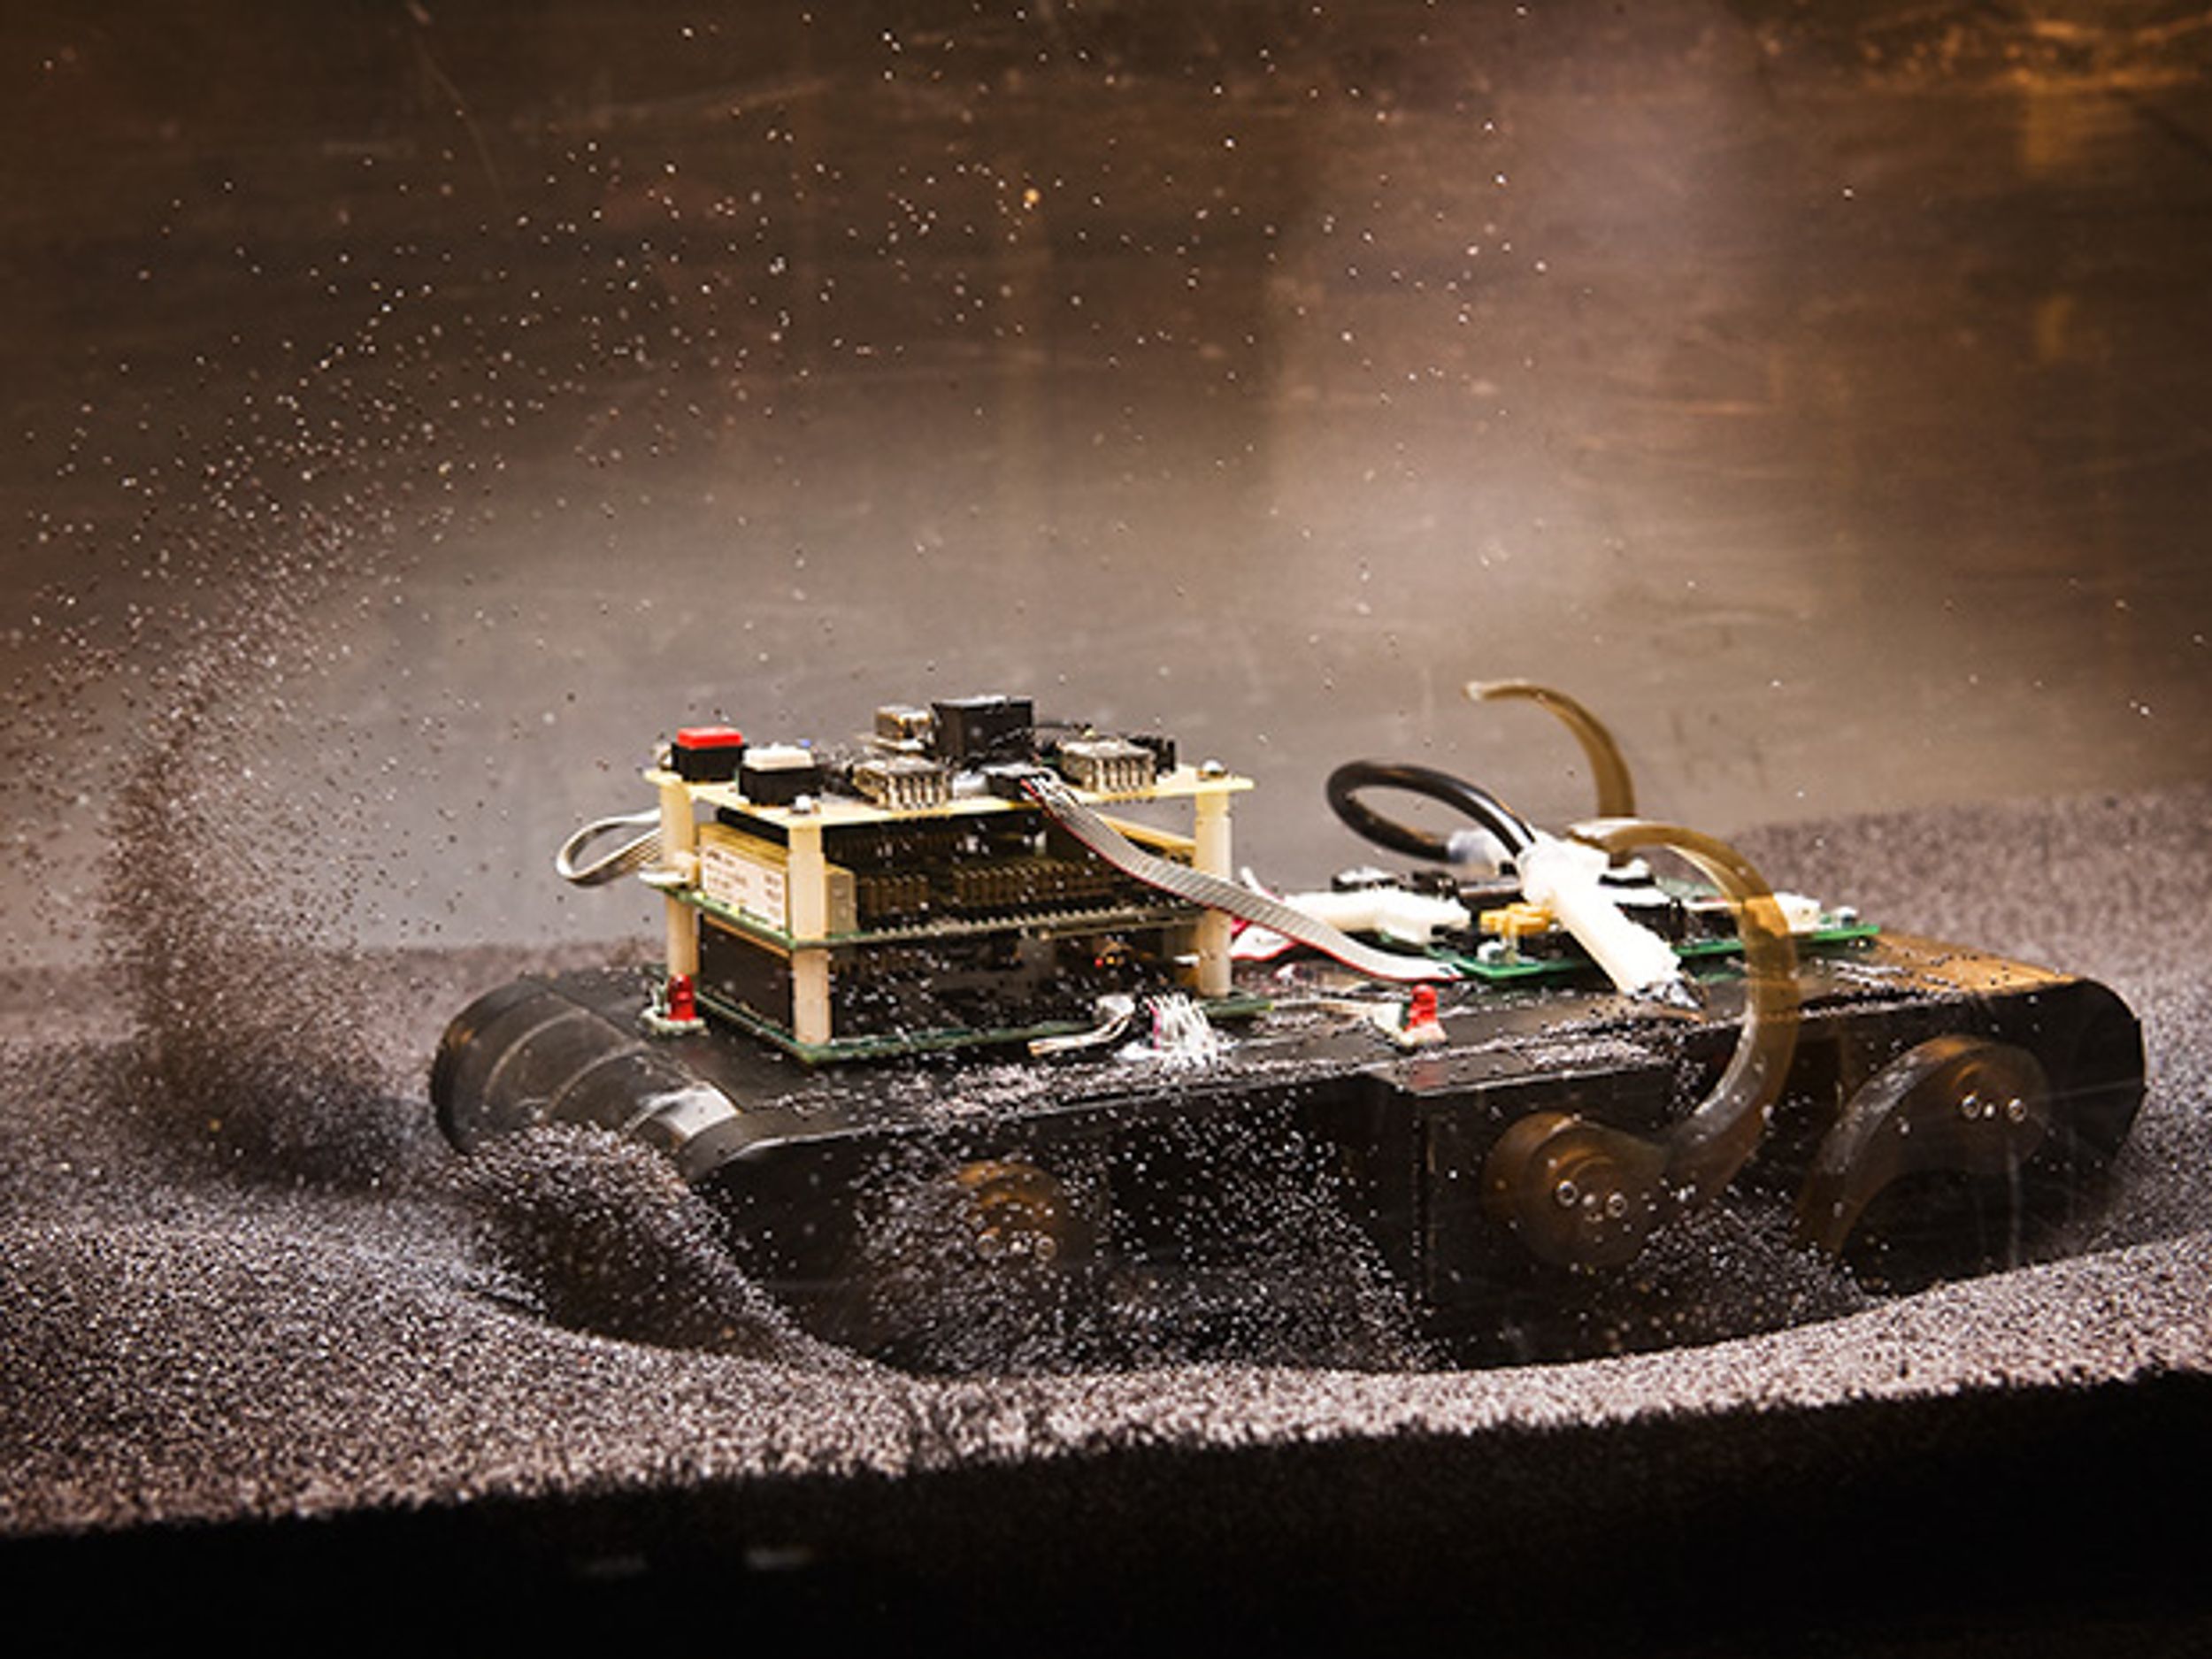 Photo of Sandbot as it trundles down a track filled with poppy seeds.